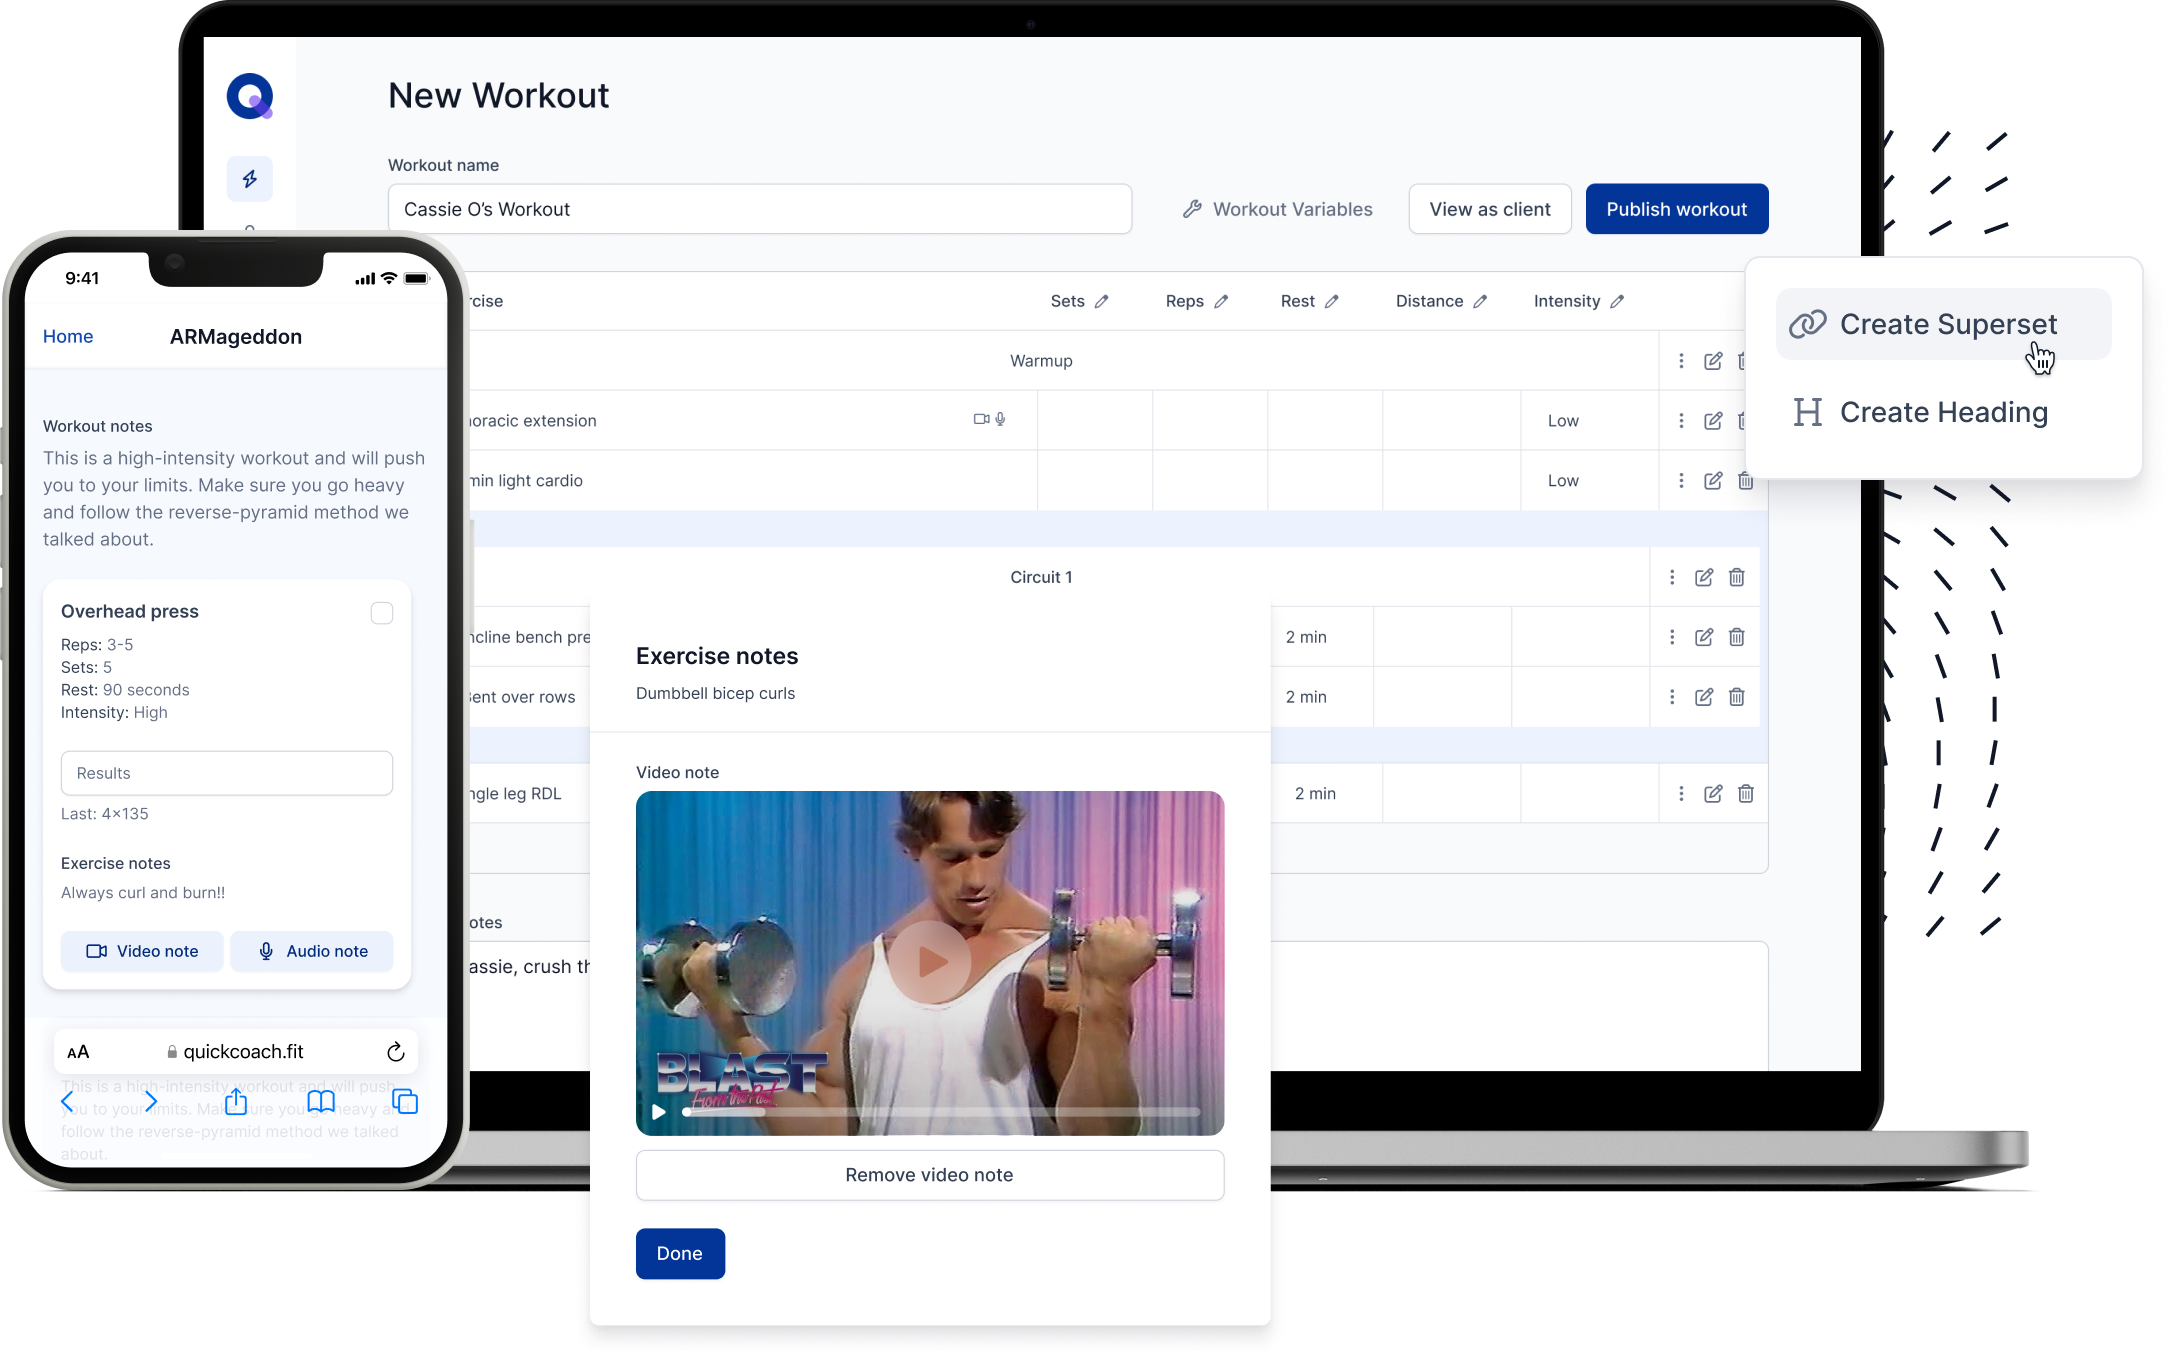 The plan builder interface in the QuickCoach App, where users can seamlessly build training plans for clients in a sleek format.